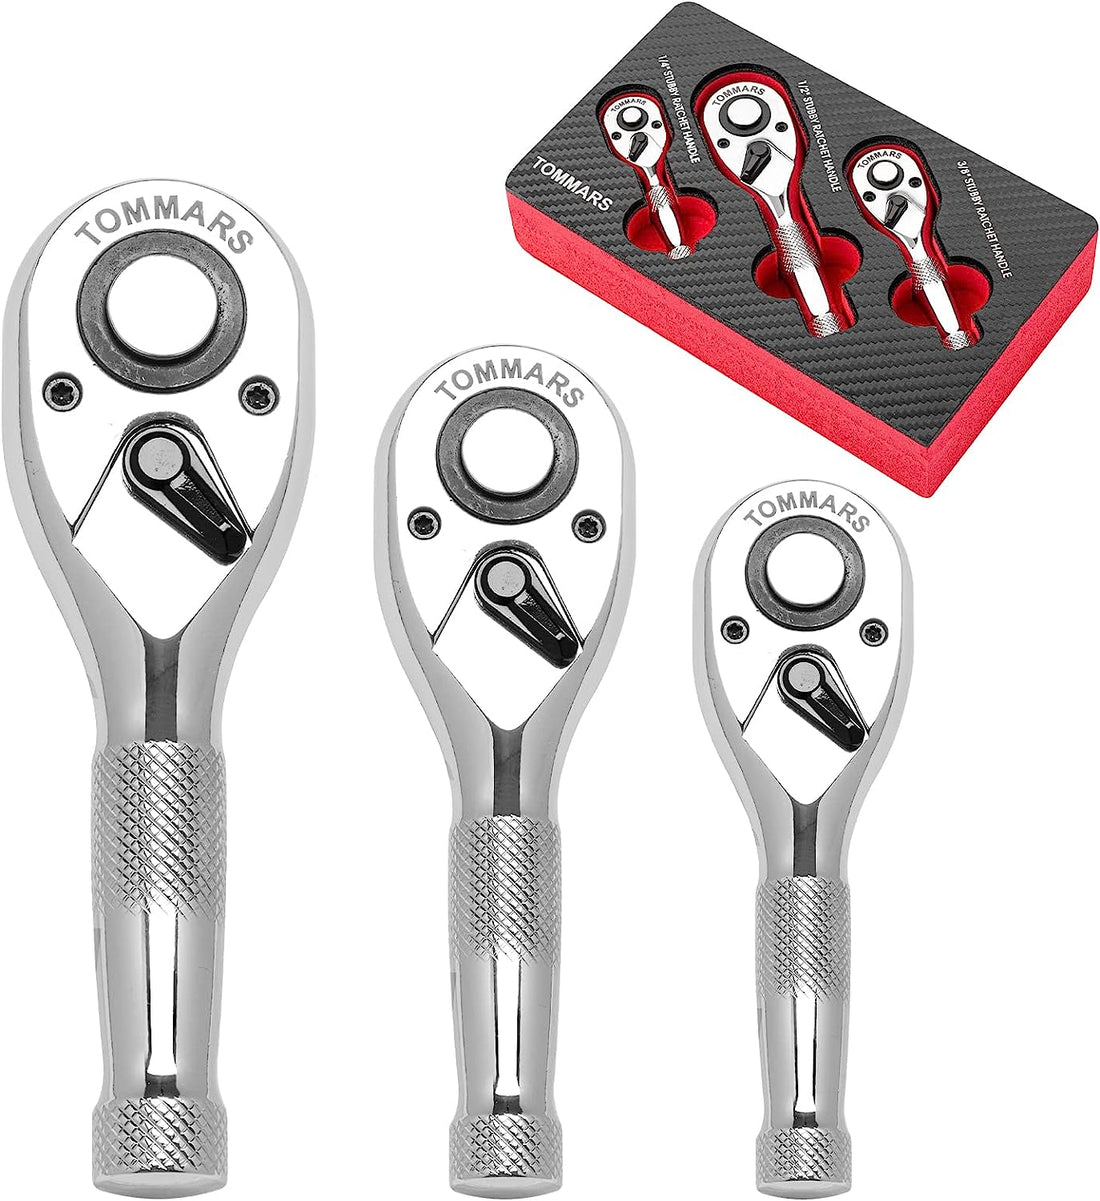 TOMMARS Stubby Ratchet Set: The Compact Powerhouse for Quick Repairs